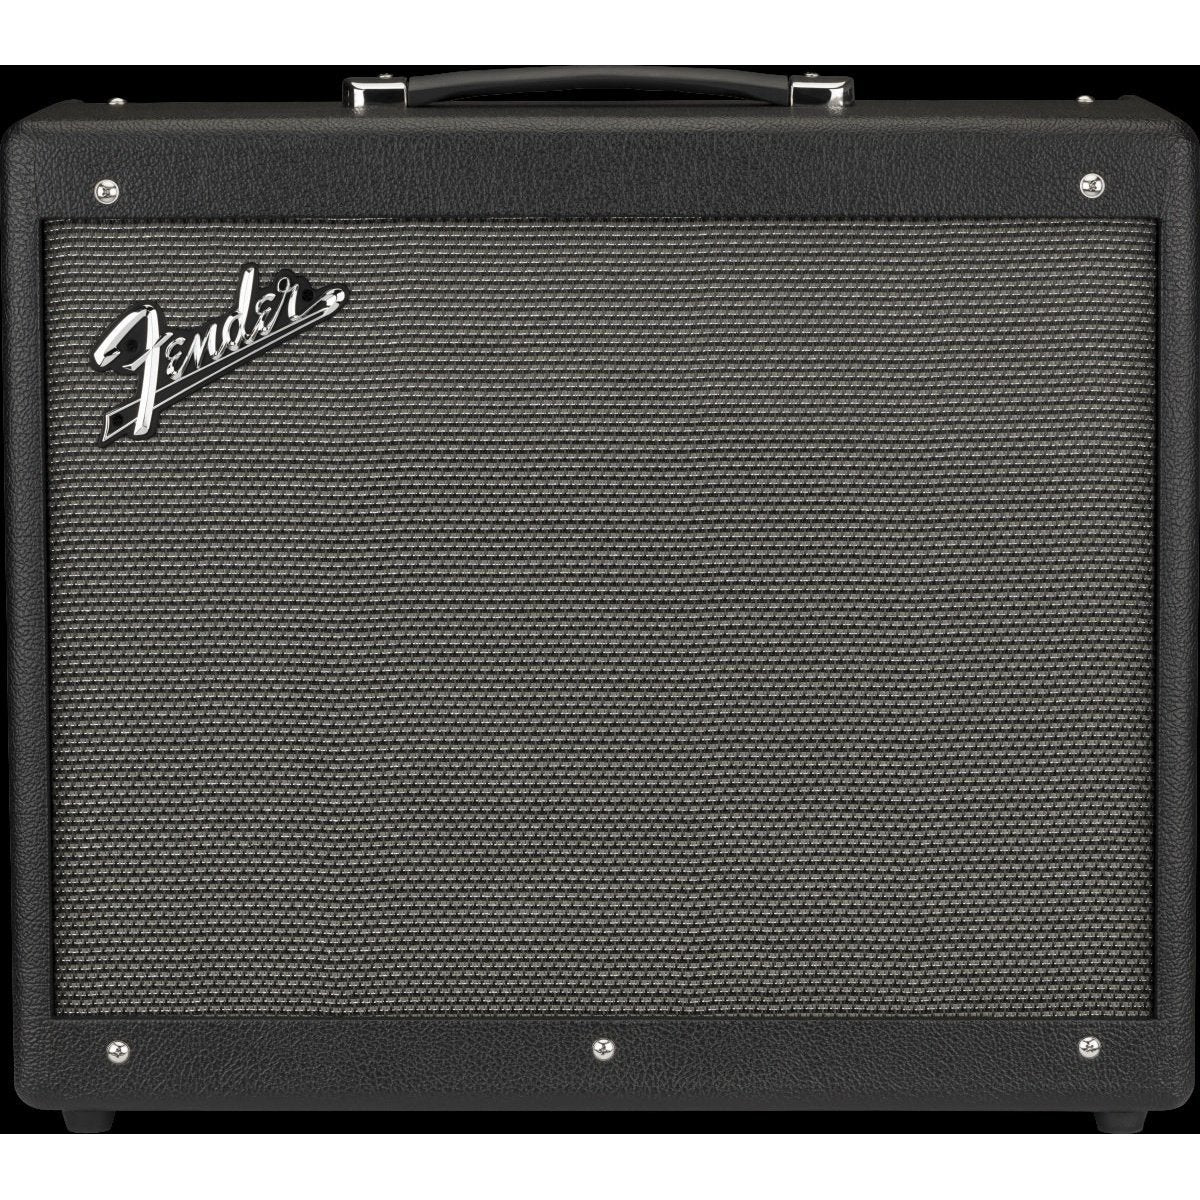 Fender Mustang GTX100 Electric Guitar Amp with 12" Speaker-100 Watts-Music World Academy